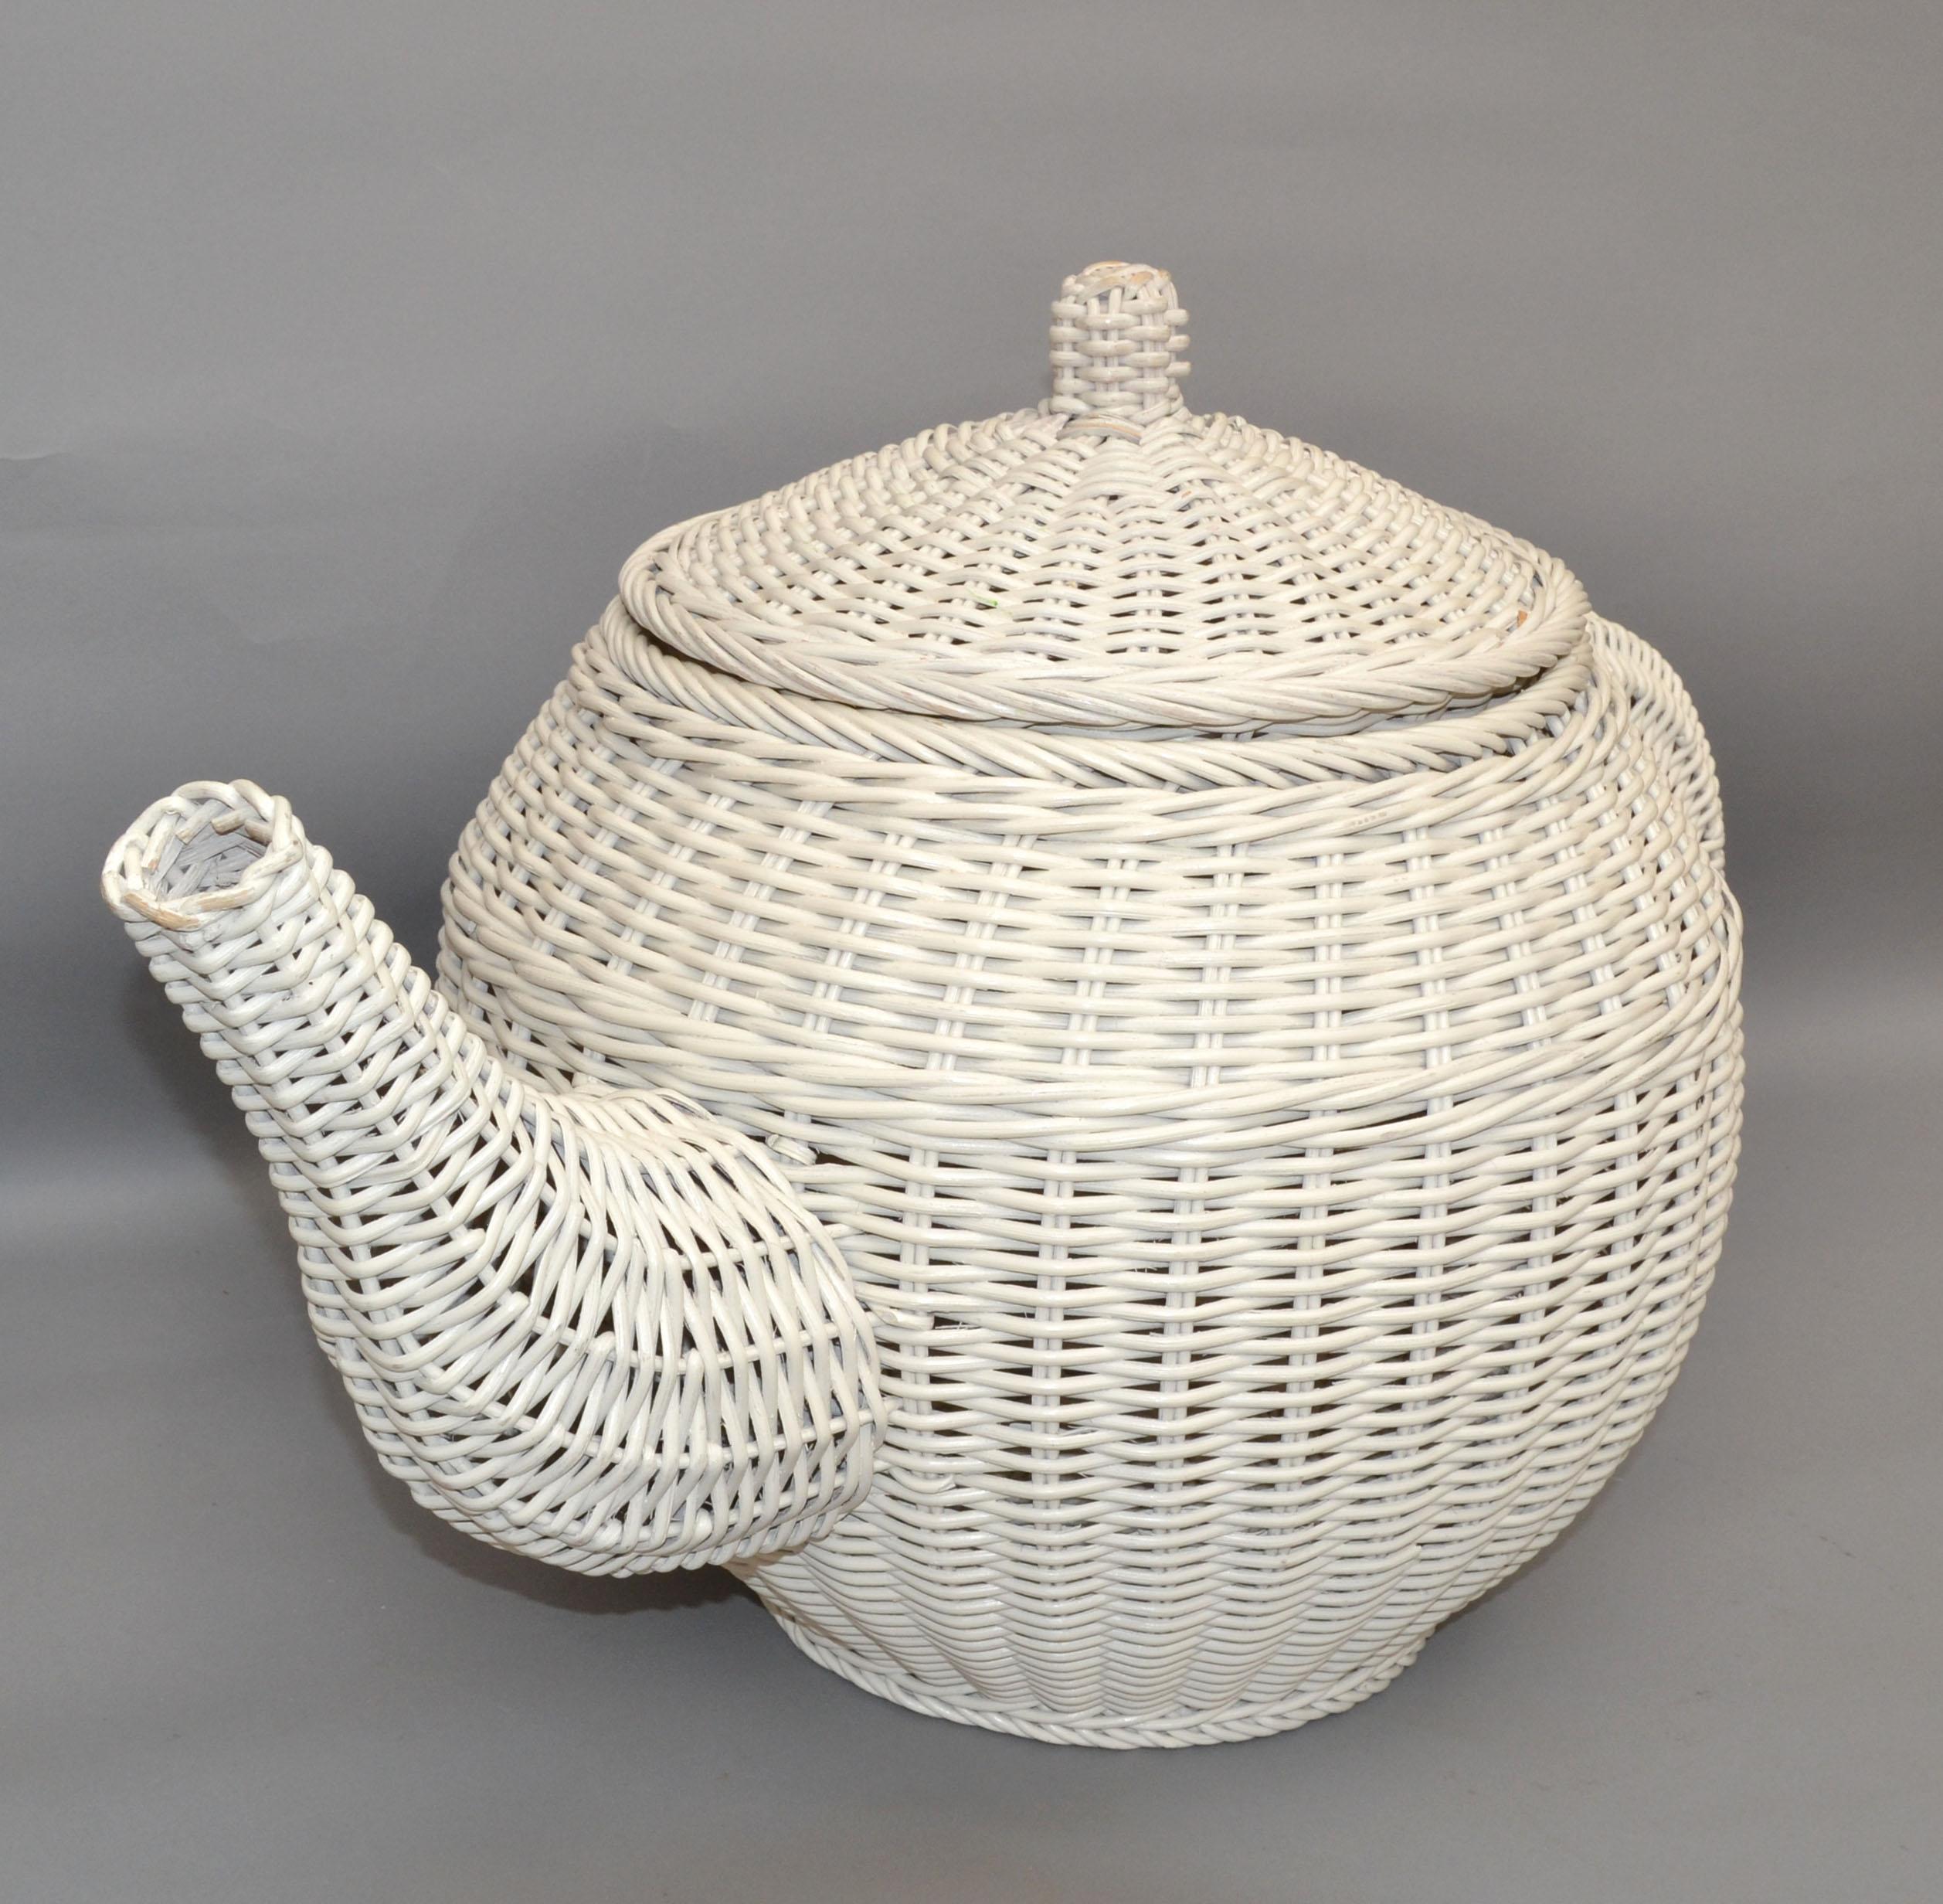 American Mid-Century Modern Sculptural Handmade White Finished Wicker & Rattan Coffee Pot For Sale